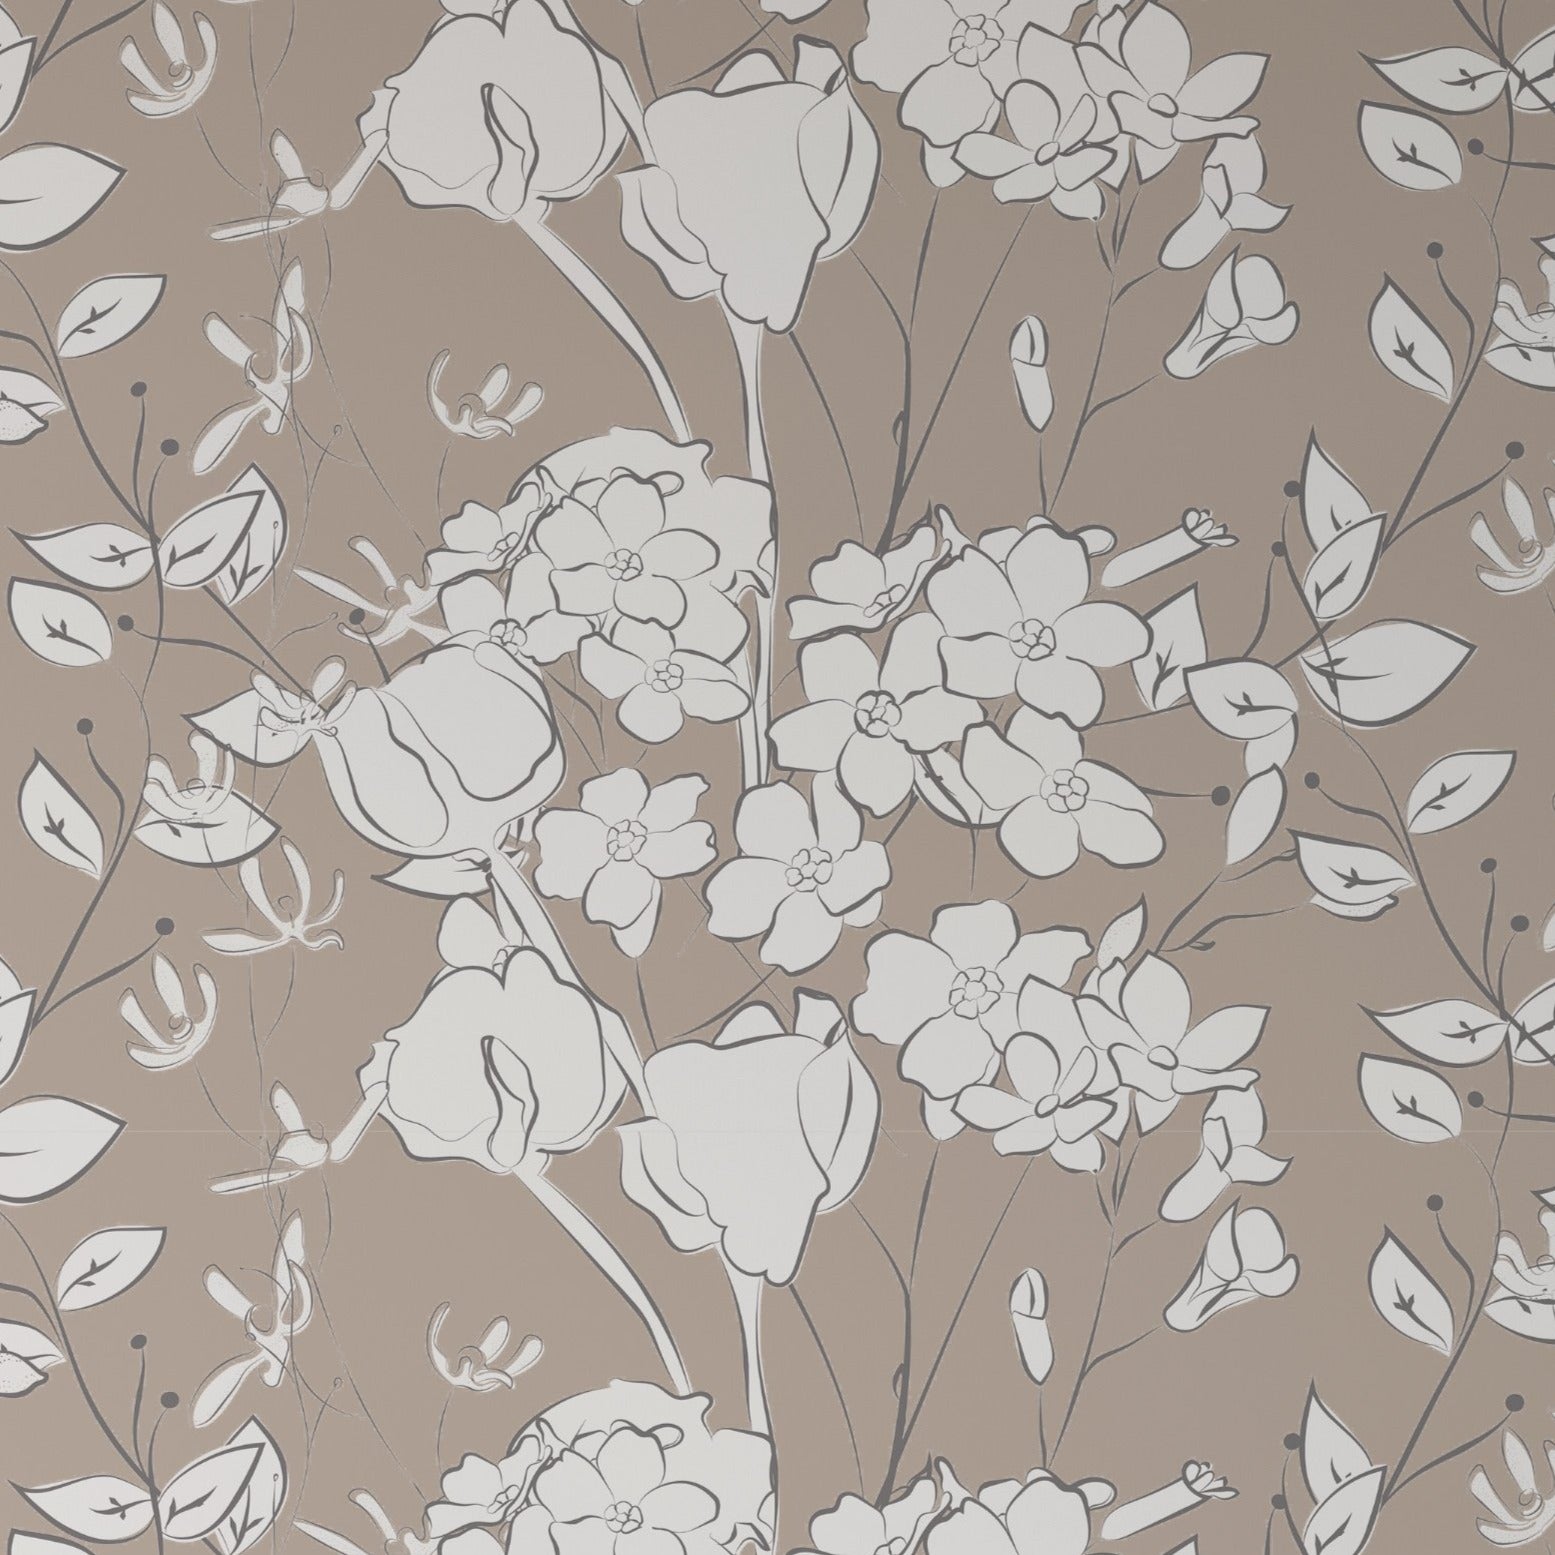 A close-up of the "Floral Line Art Wallpaper" featuring elegant white line-drawn flowers and botanical elements on a warm taupe background. The design showcases a contemporary take on floral patterns with its minimalist line art style, creating a sophisticated and modern aesthetic.